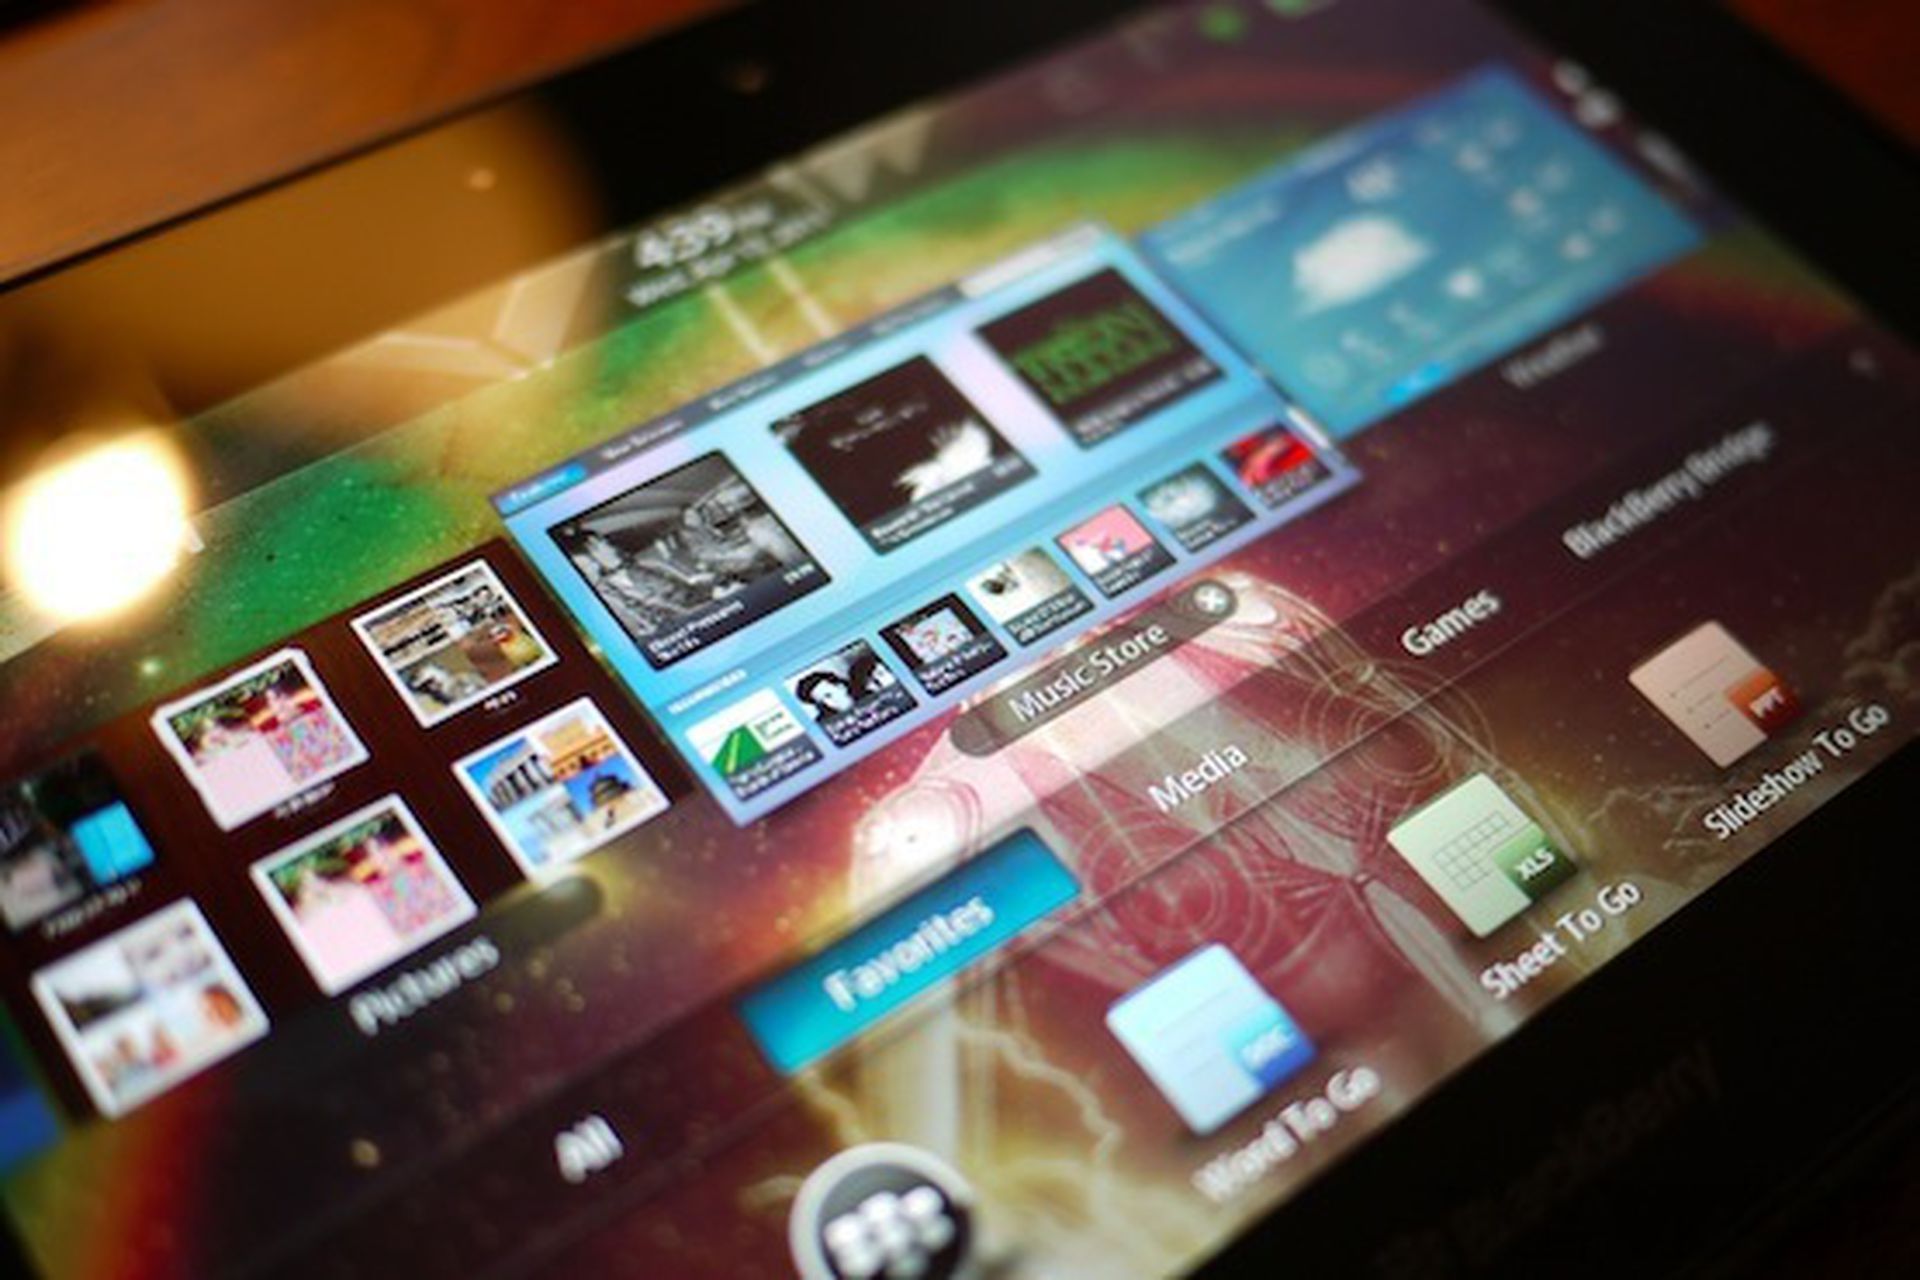 Wsj Confirms Blackberry Playbook Revamp In The Works The Verge